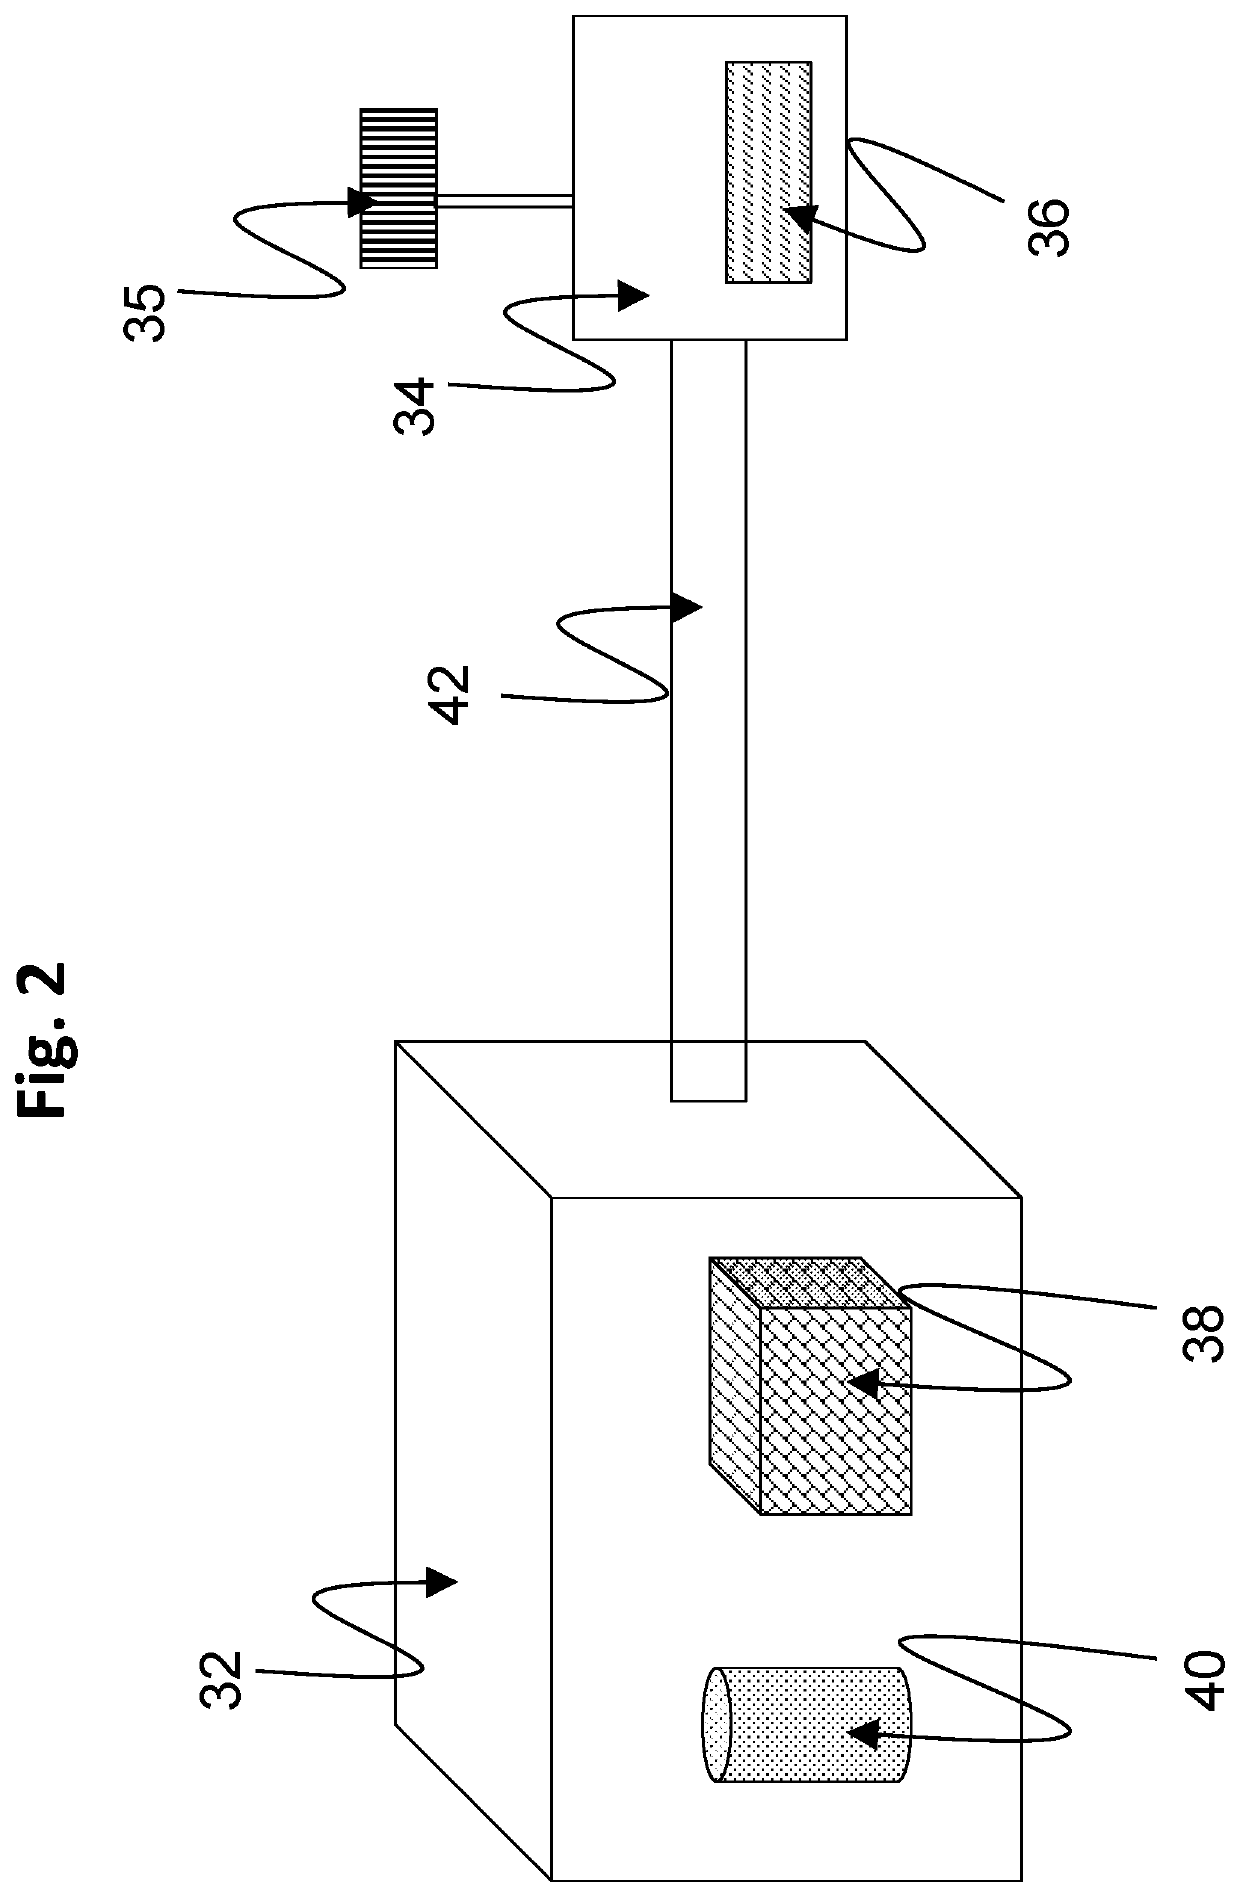 Microfluidic device and methods for digital assays in biological analyses